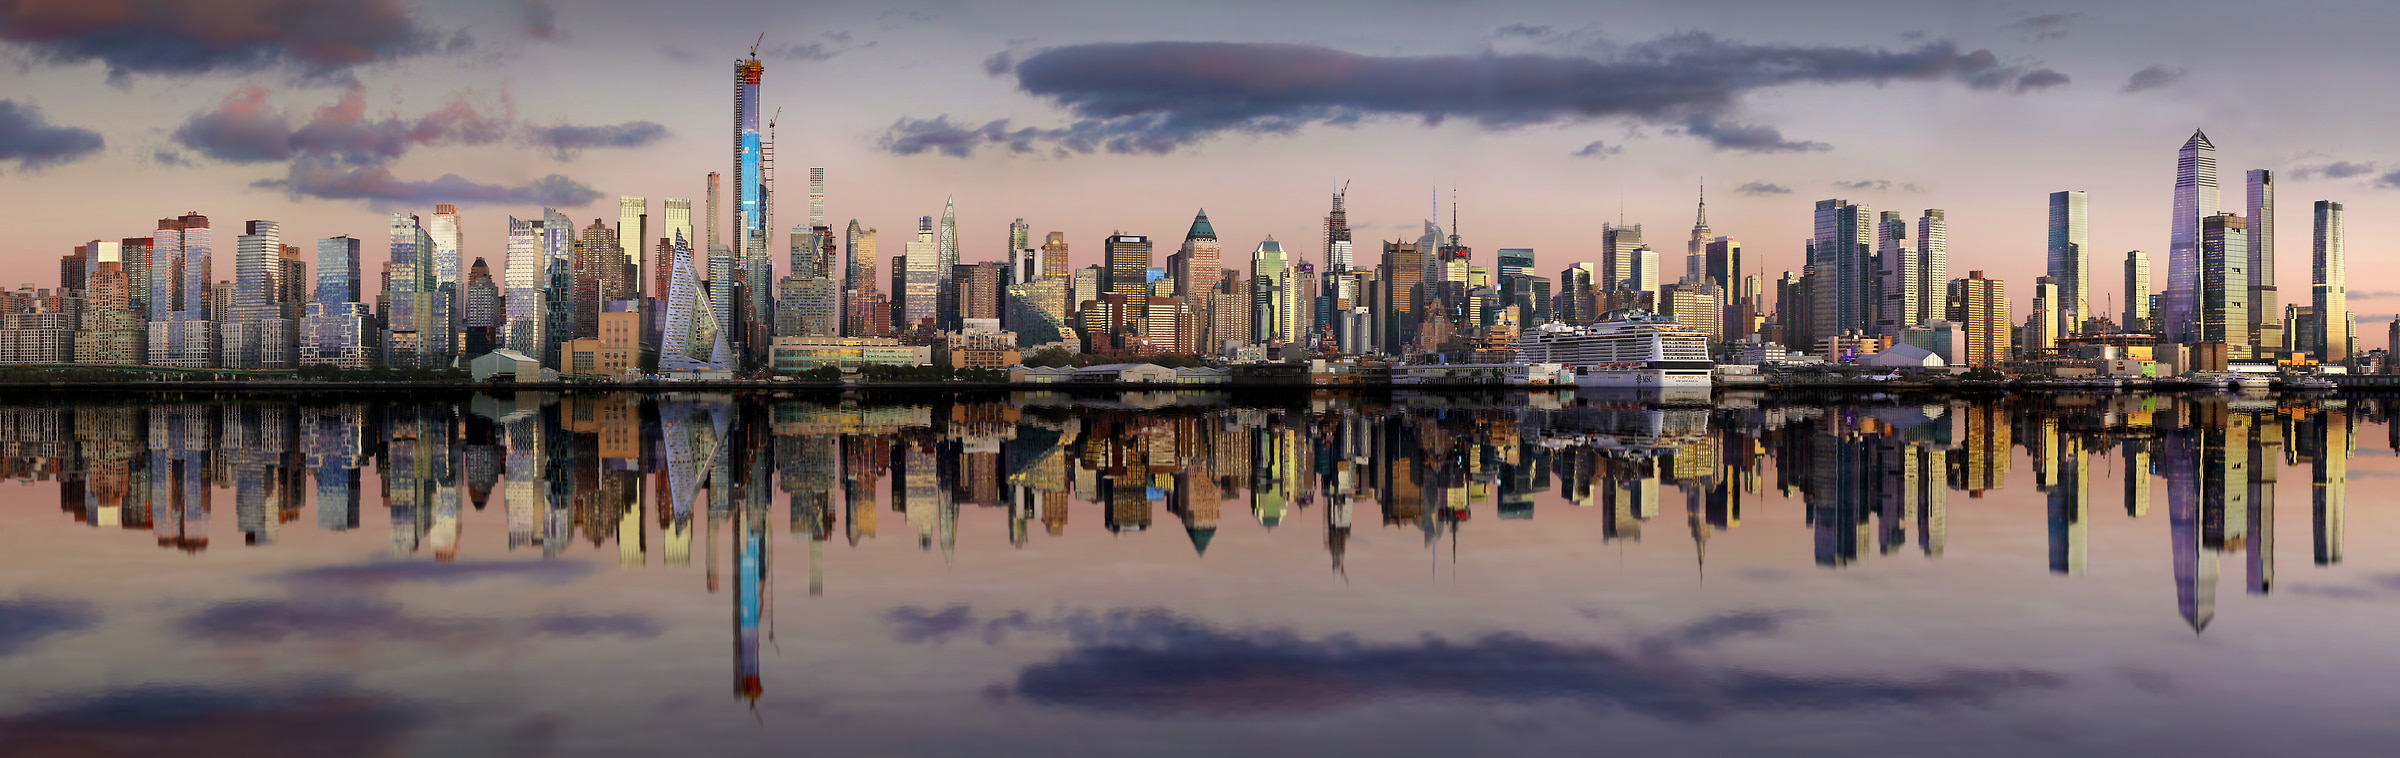 922 megapixels! A very high resolution, large-format VAST photo print of the New York skyline at sunset reflecting in the Hudson River; panorama photograph created by Phil Crawshay in New York, Manhattan.